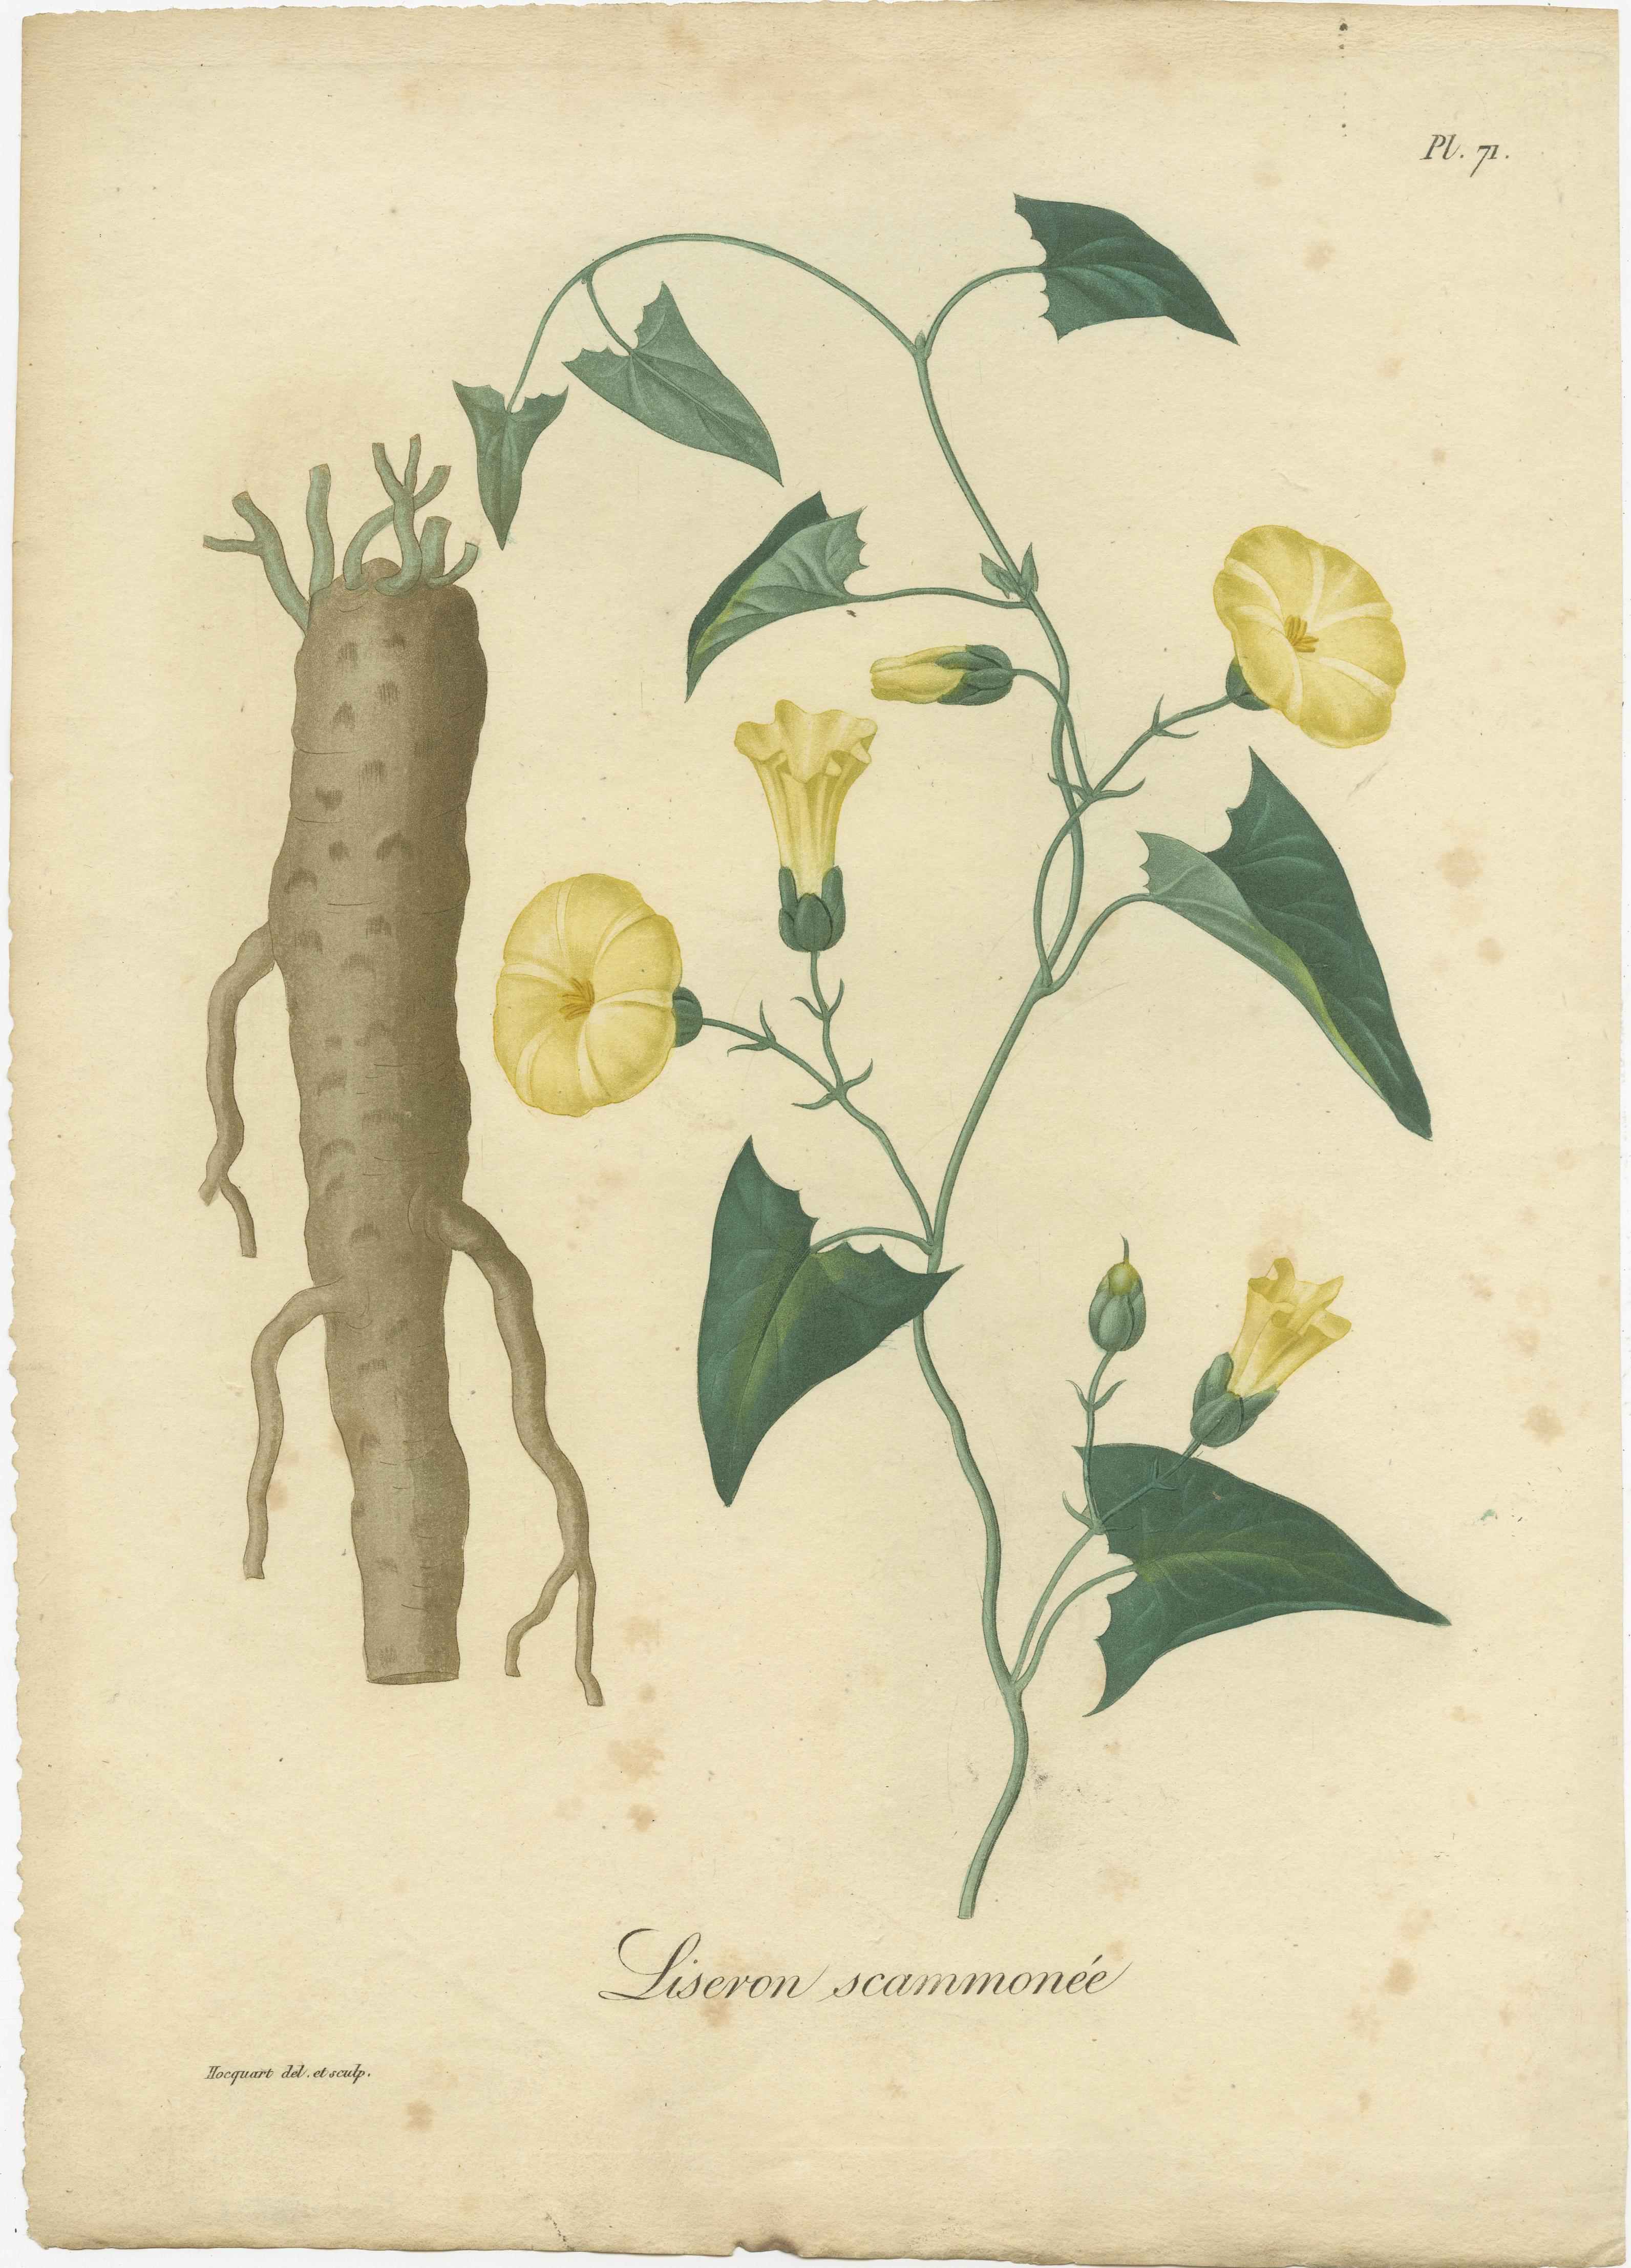 Antique botanical print titled 'Liseron Scammonée'. This print shows the Convolvulus Scammonia, commonly known as scammony. It is a bindweed native to the countries of the eastern part of the Mediterranean basin; it grows in bushy waste places, from